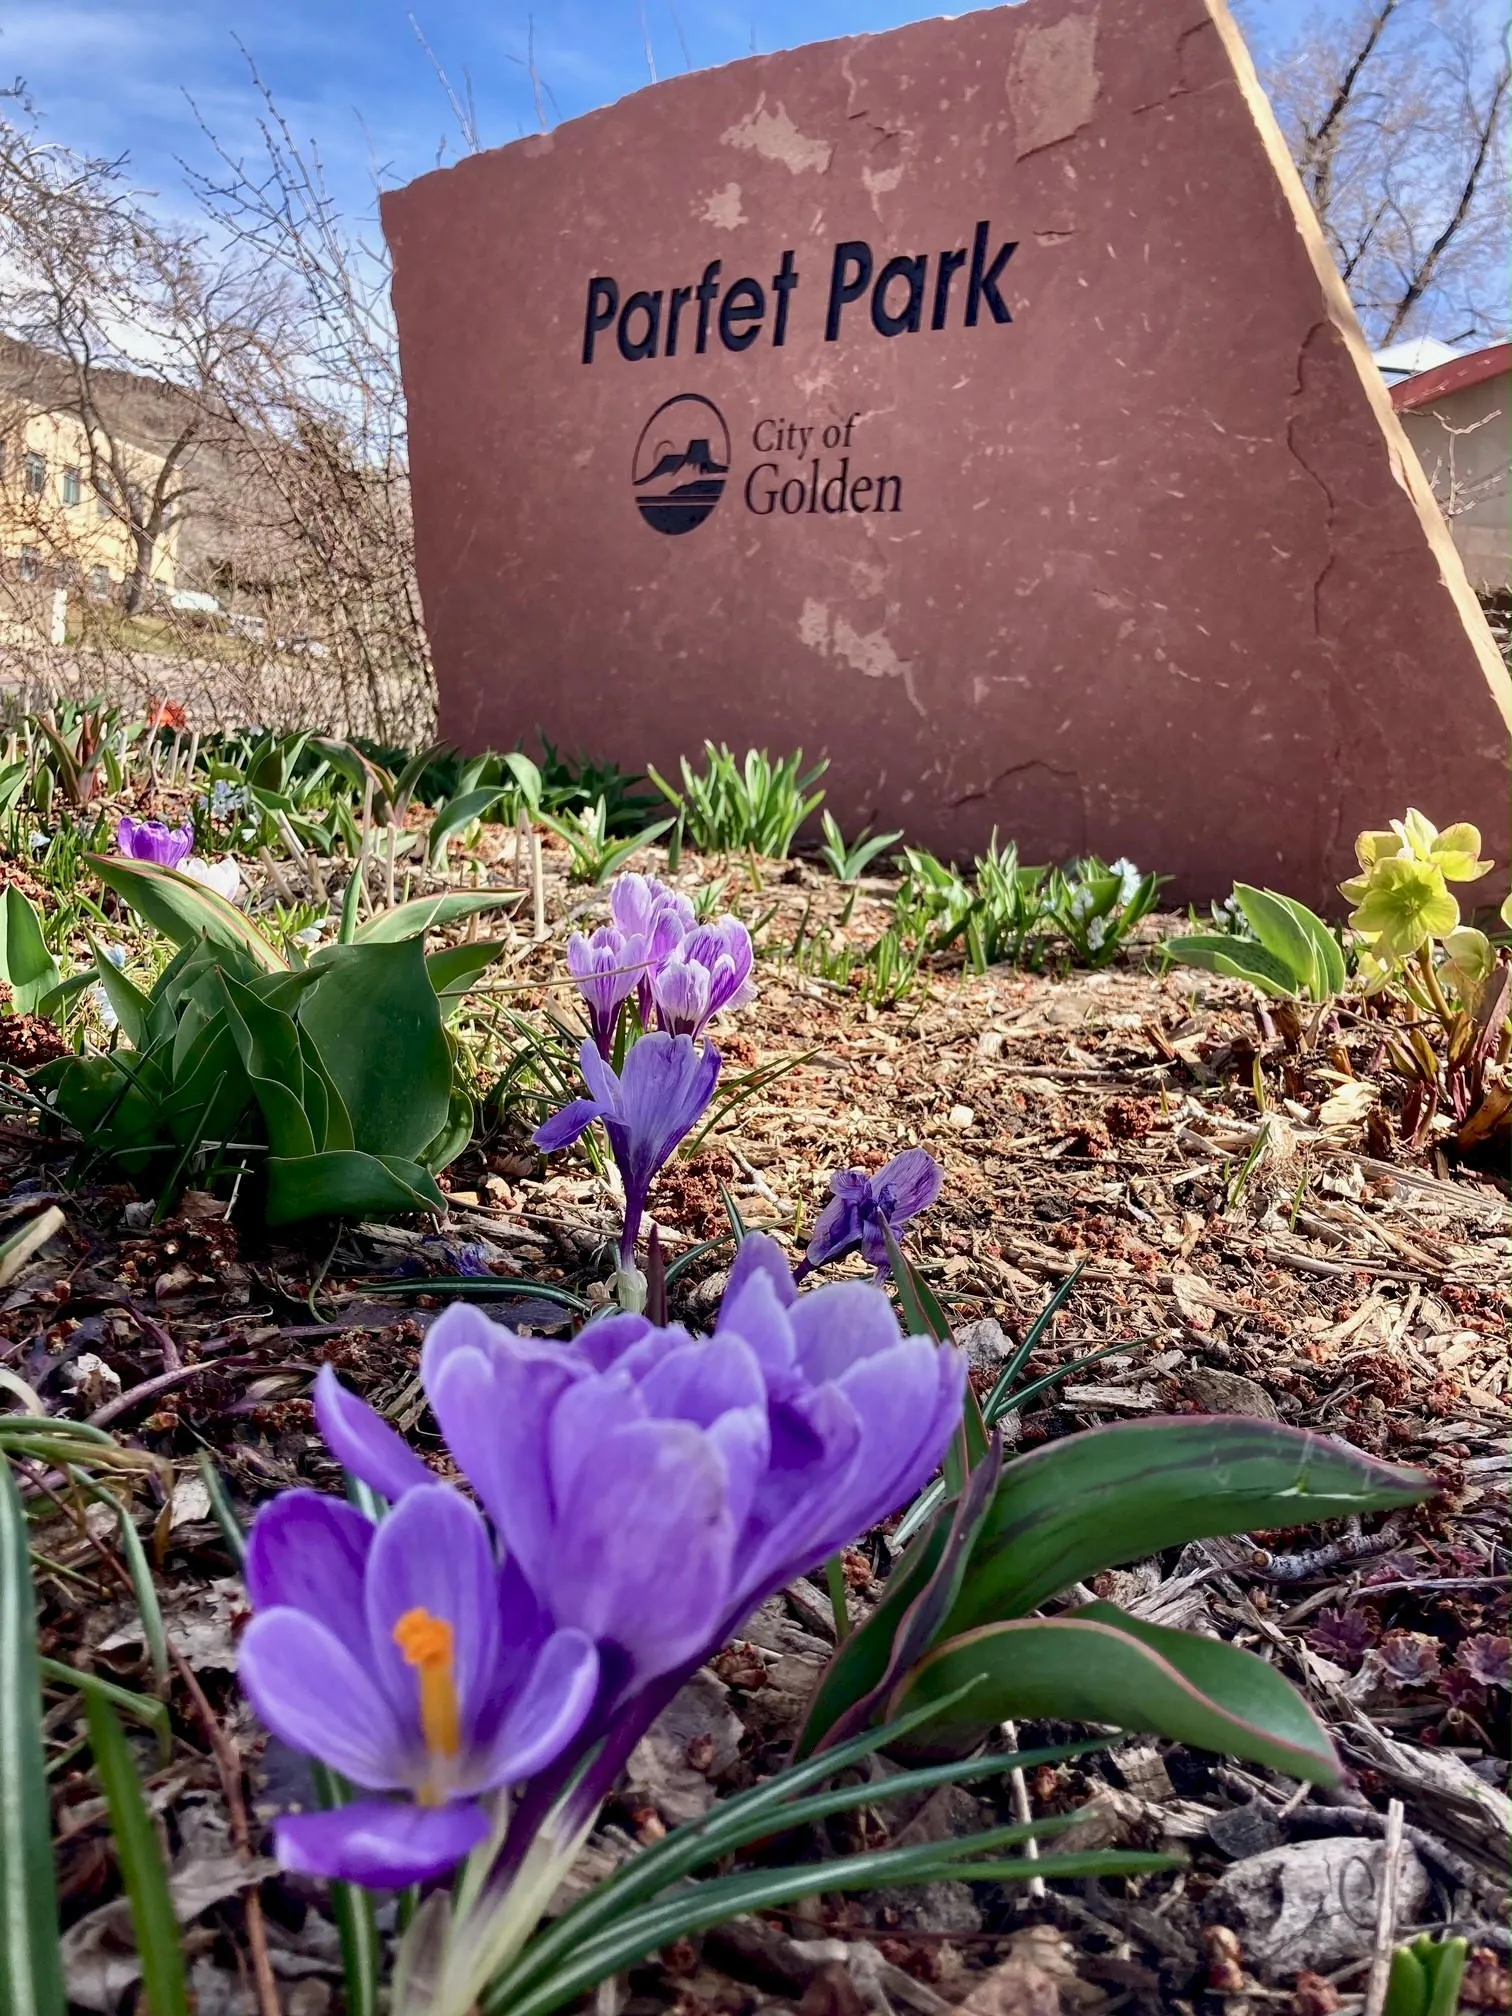 Purple crocus in the foreground and a sandstone slab saying "Parfet Park" in the background